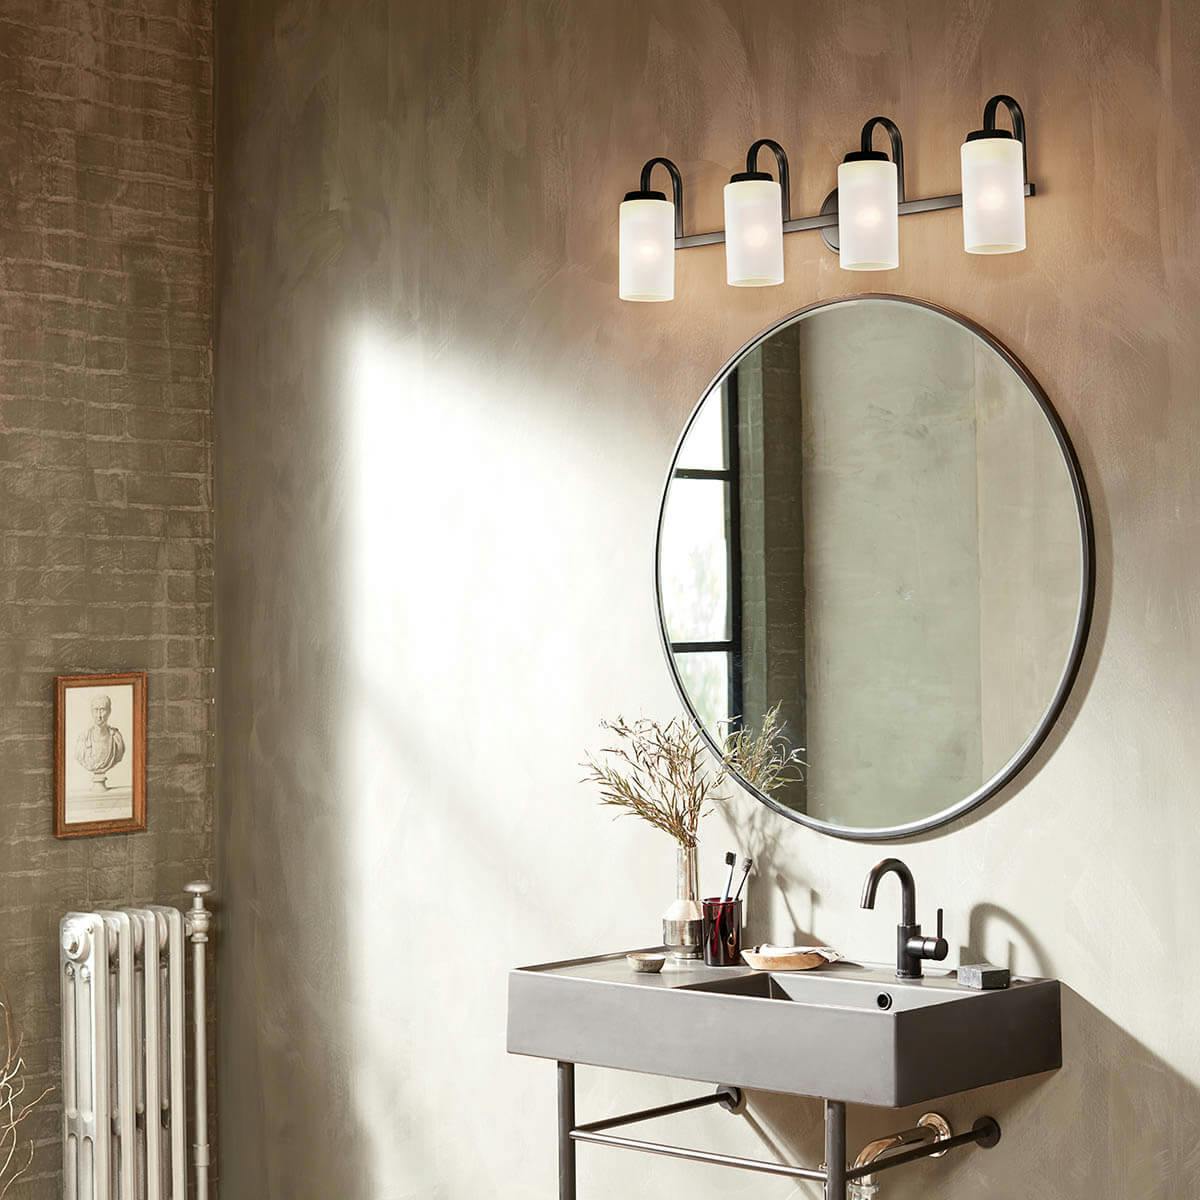 Day time bathroom with Kennewick 4 light vanity light in black